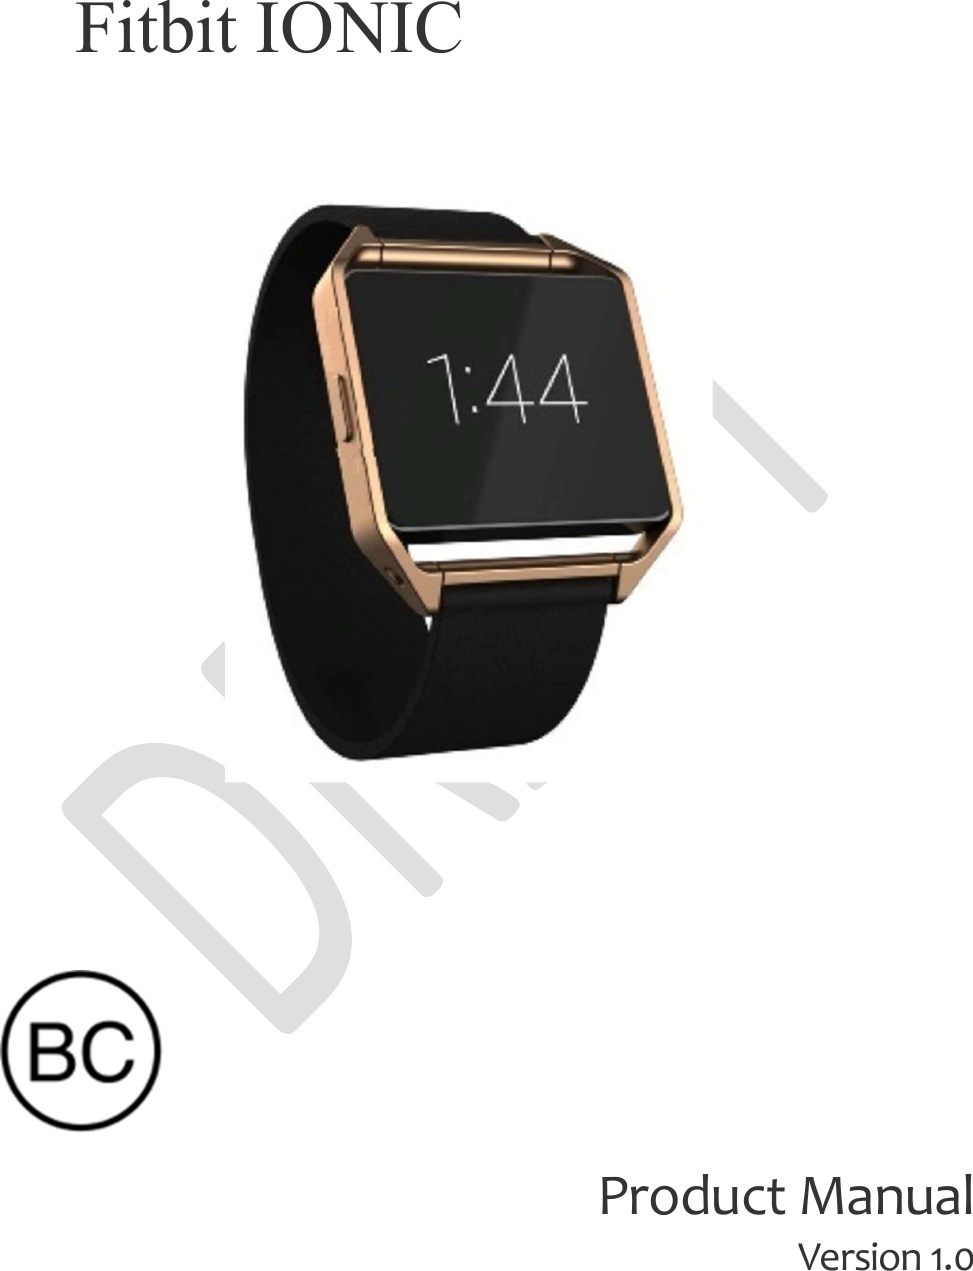     Fitbit IONIC         Product Manual Version 1.0 